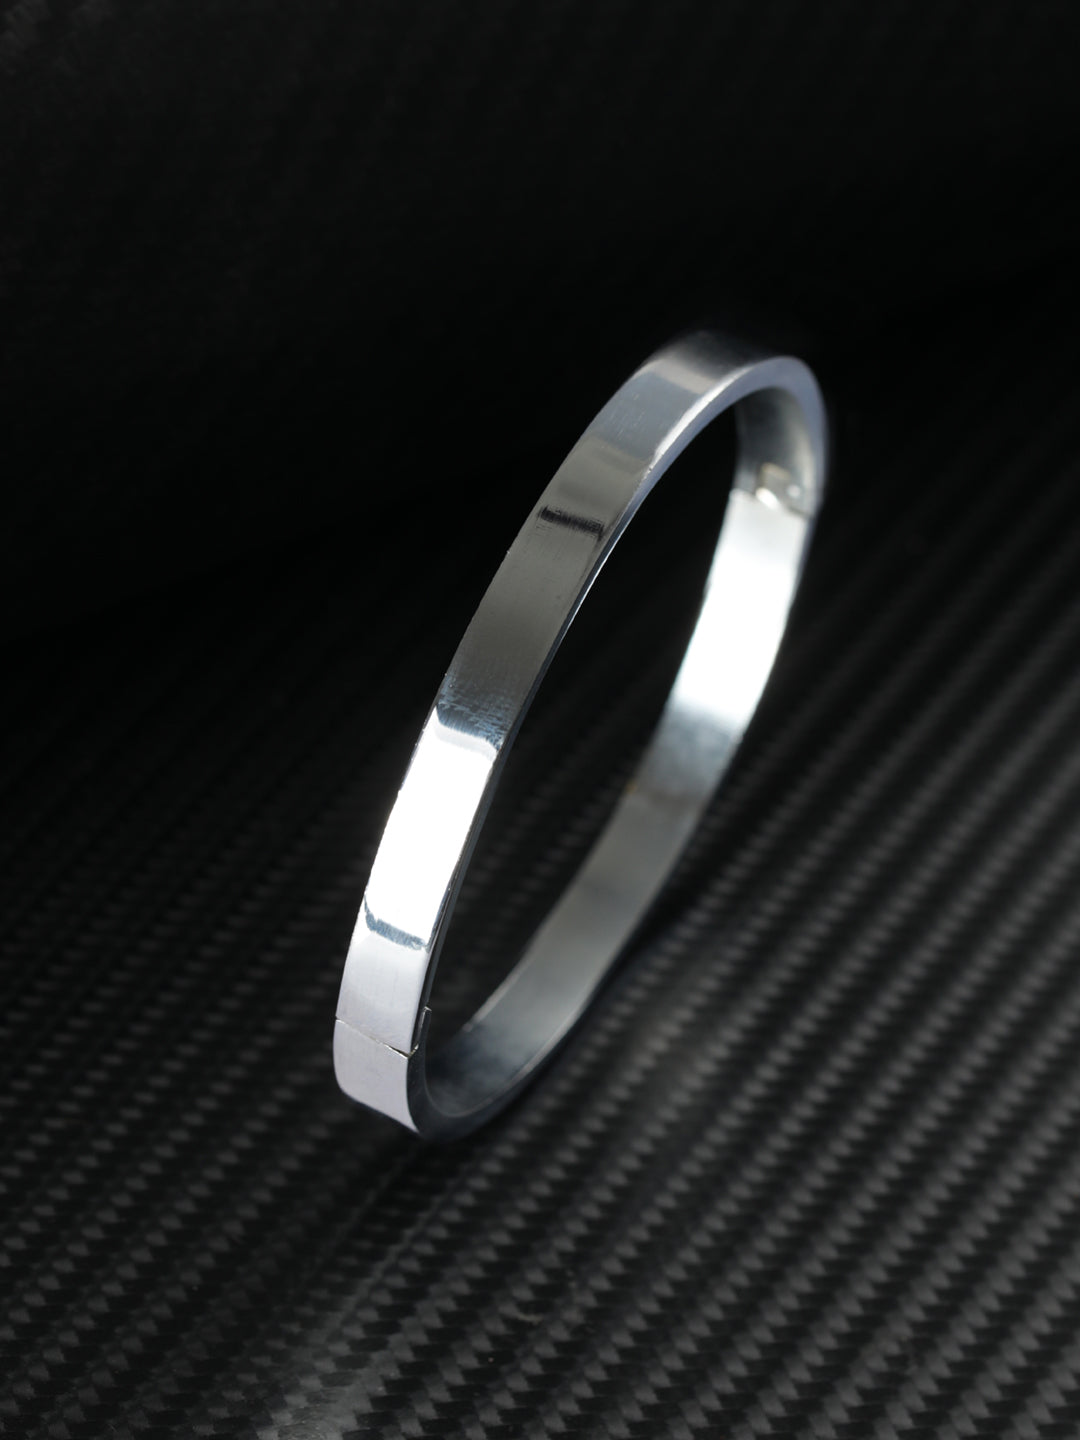 Solid Silver-Plated Cuff Bracelet for Men